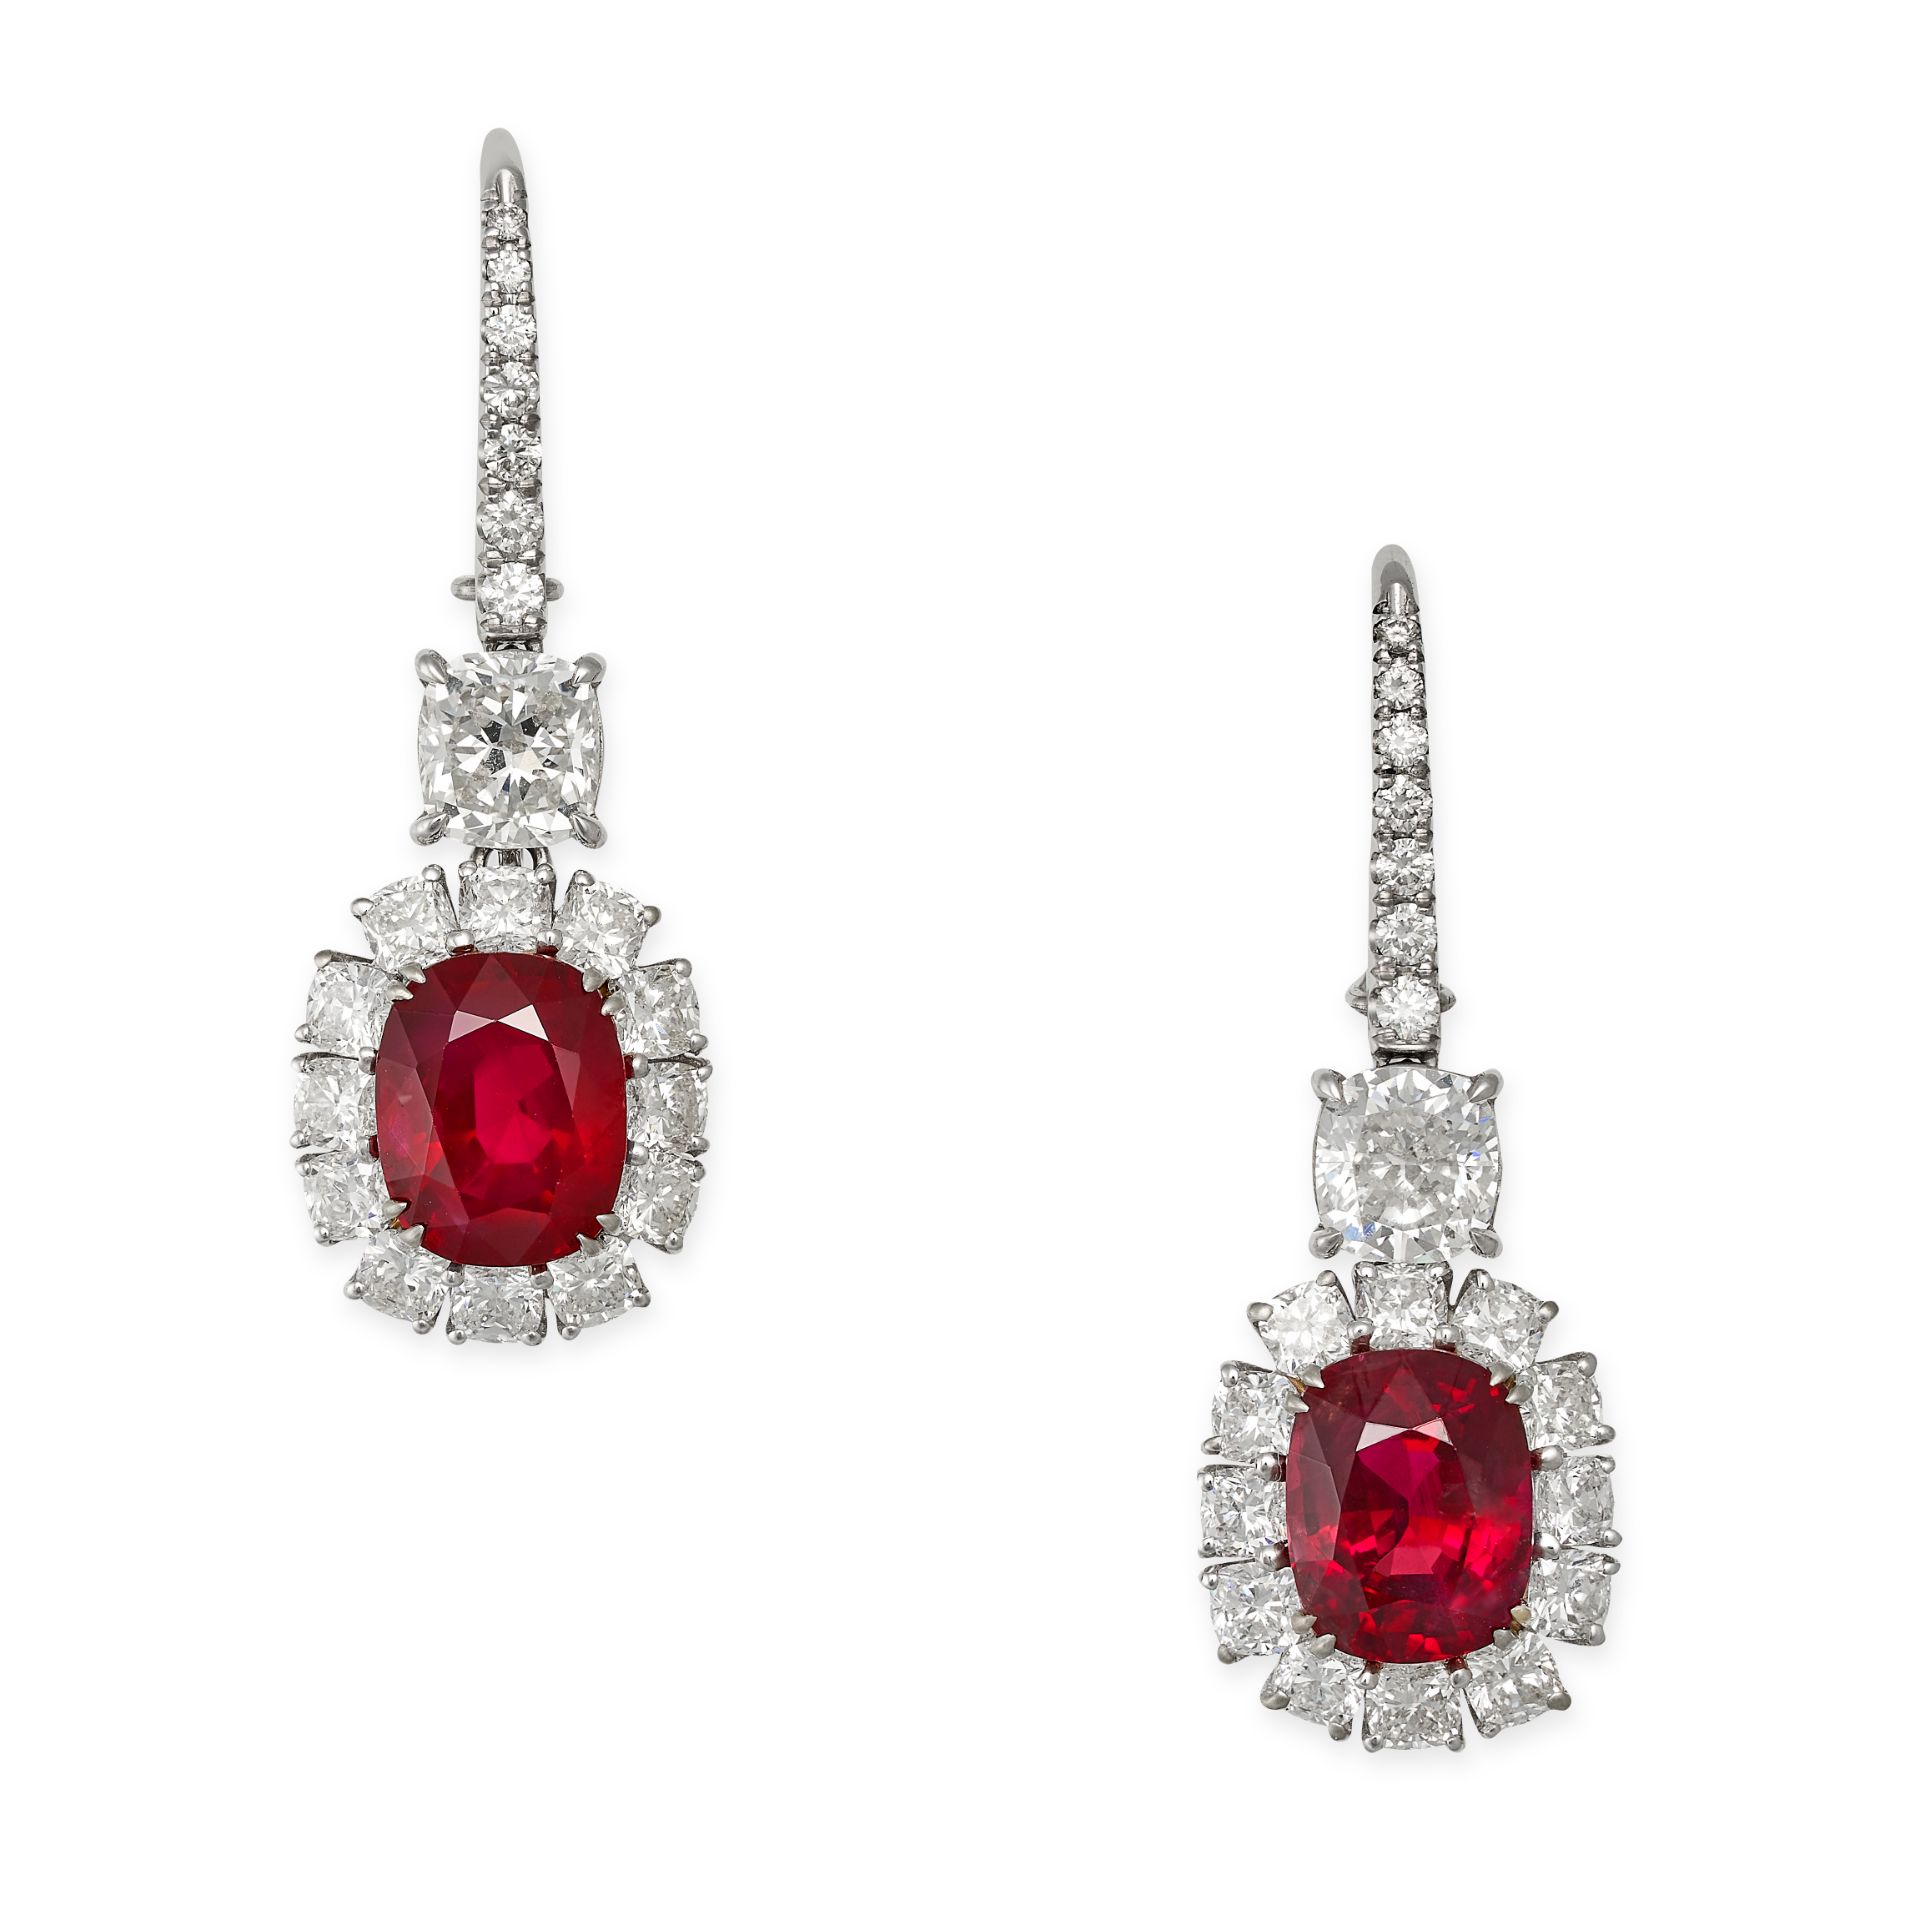 A PAIR OF IMPORTANT PIGEON'S BLOOD BURMA NO HEAT RUBY AND DIAMOND EARRINGS in white gold, each se...